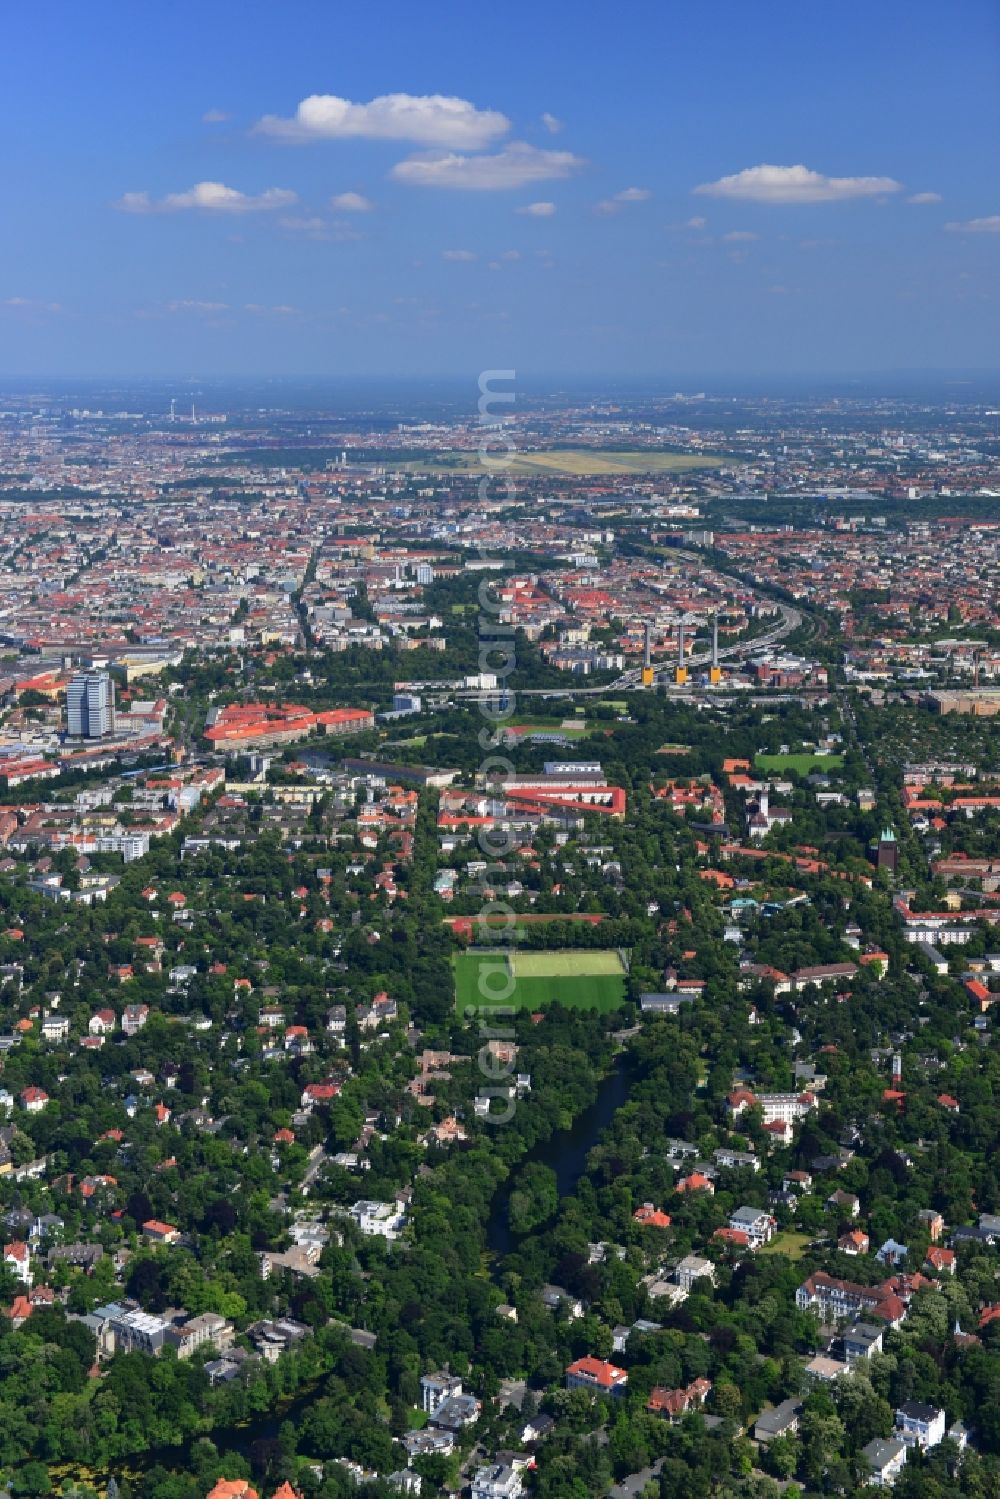 Berlin from above - Partial view of the city and residential areas Grunewald Schmargendorf in destrict Charlottenburg-Wilmersdorf of Berlin